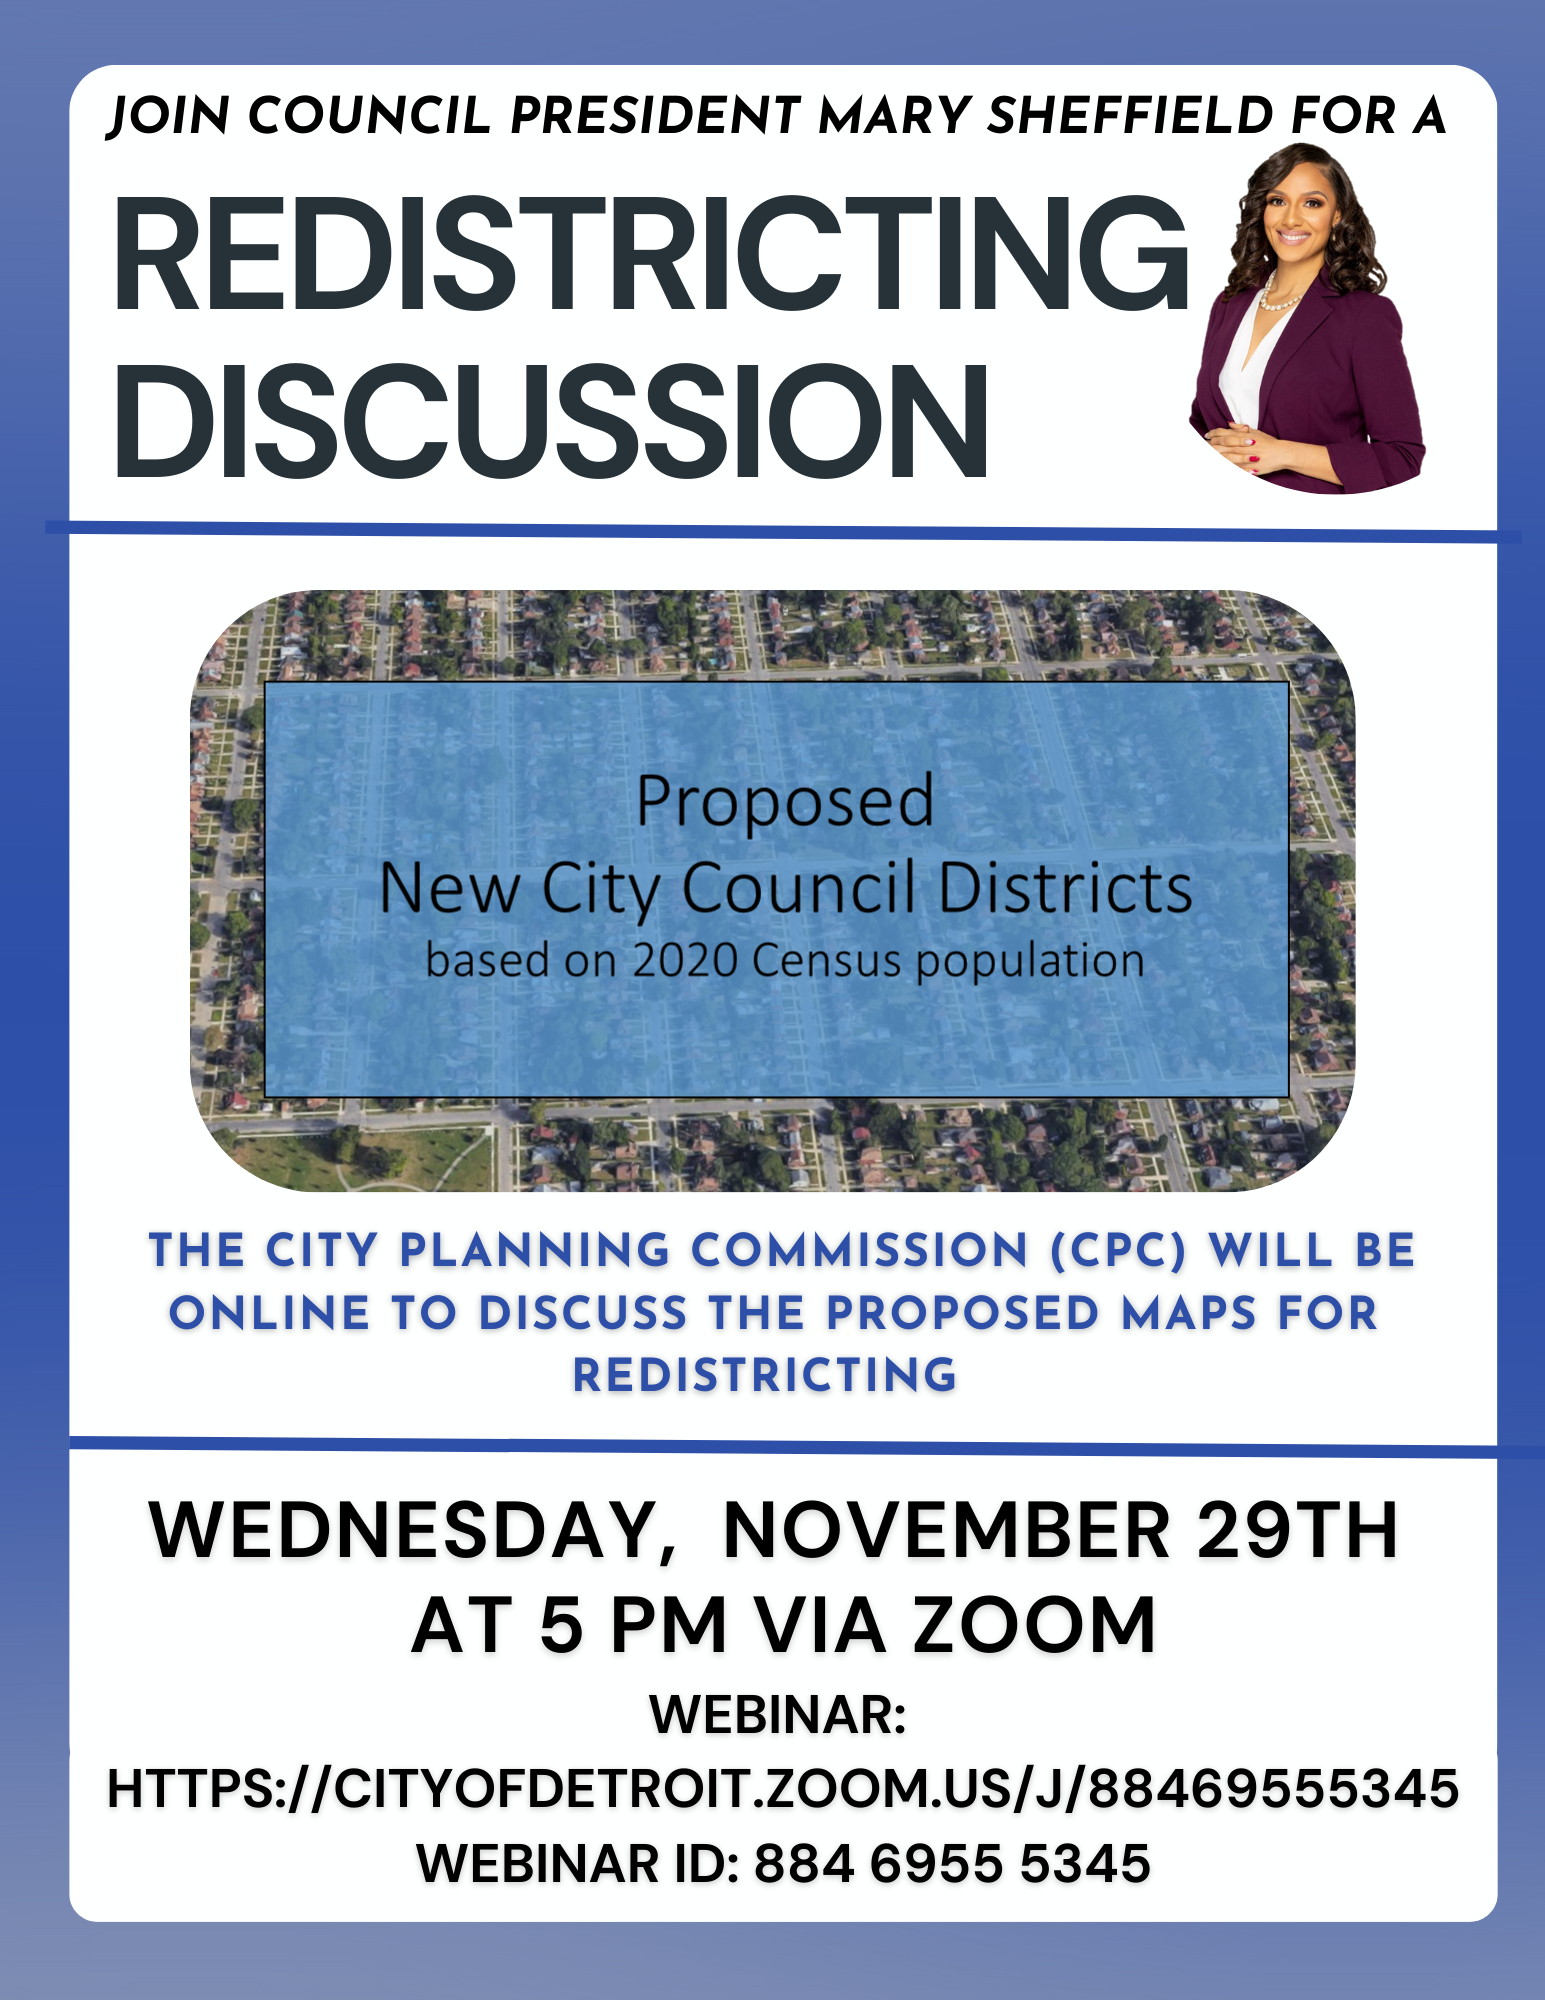 Council President Mary Sheffield to Host a Redistricting Discussion on Wednesday, November 29th at 5 pm